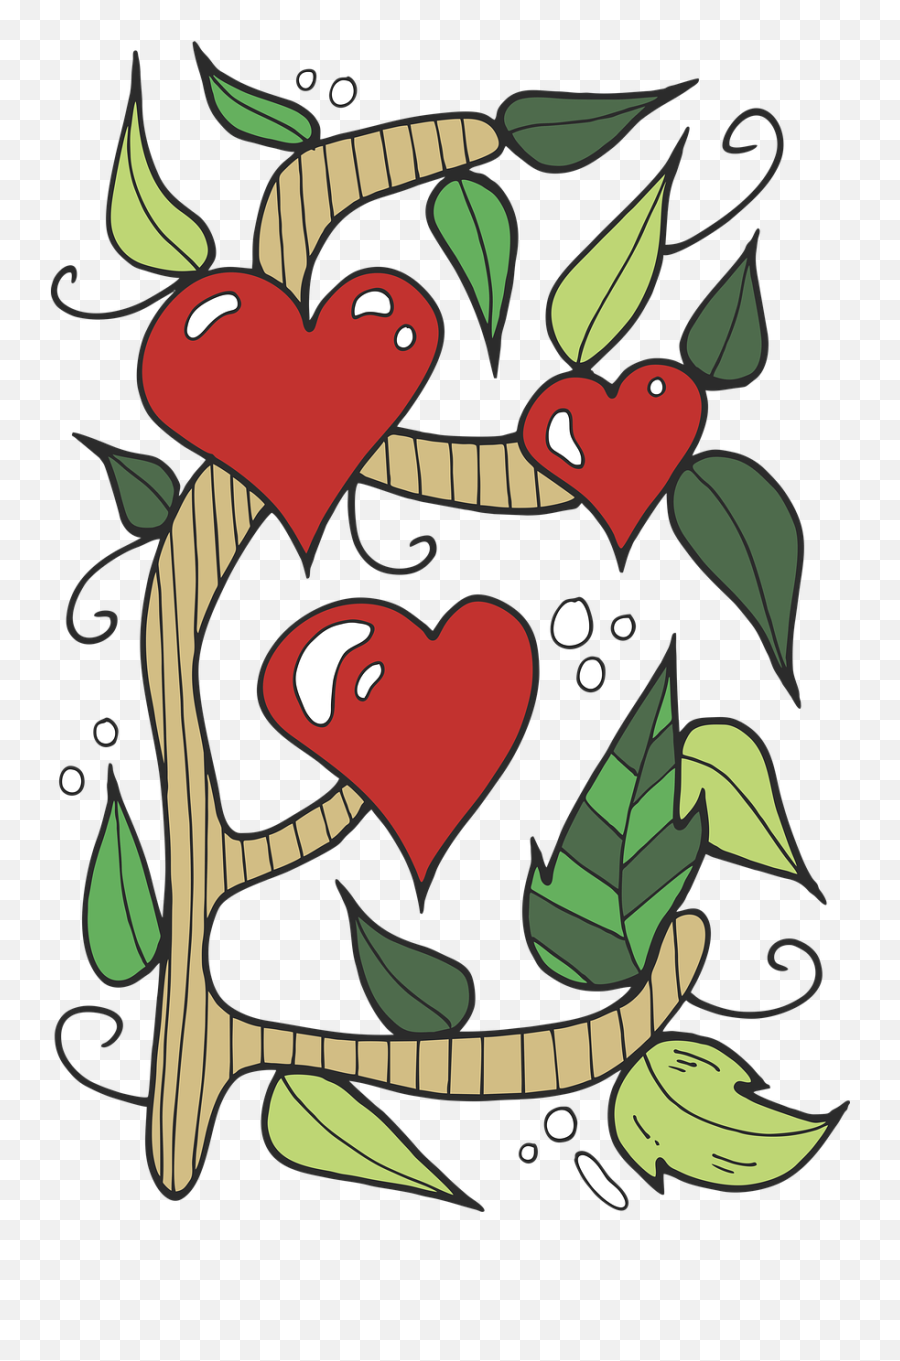 Download Free Photo Of Heart Tree Flower Romantic Love Emoji,Conduction Clipart